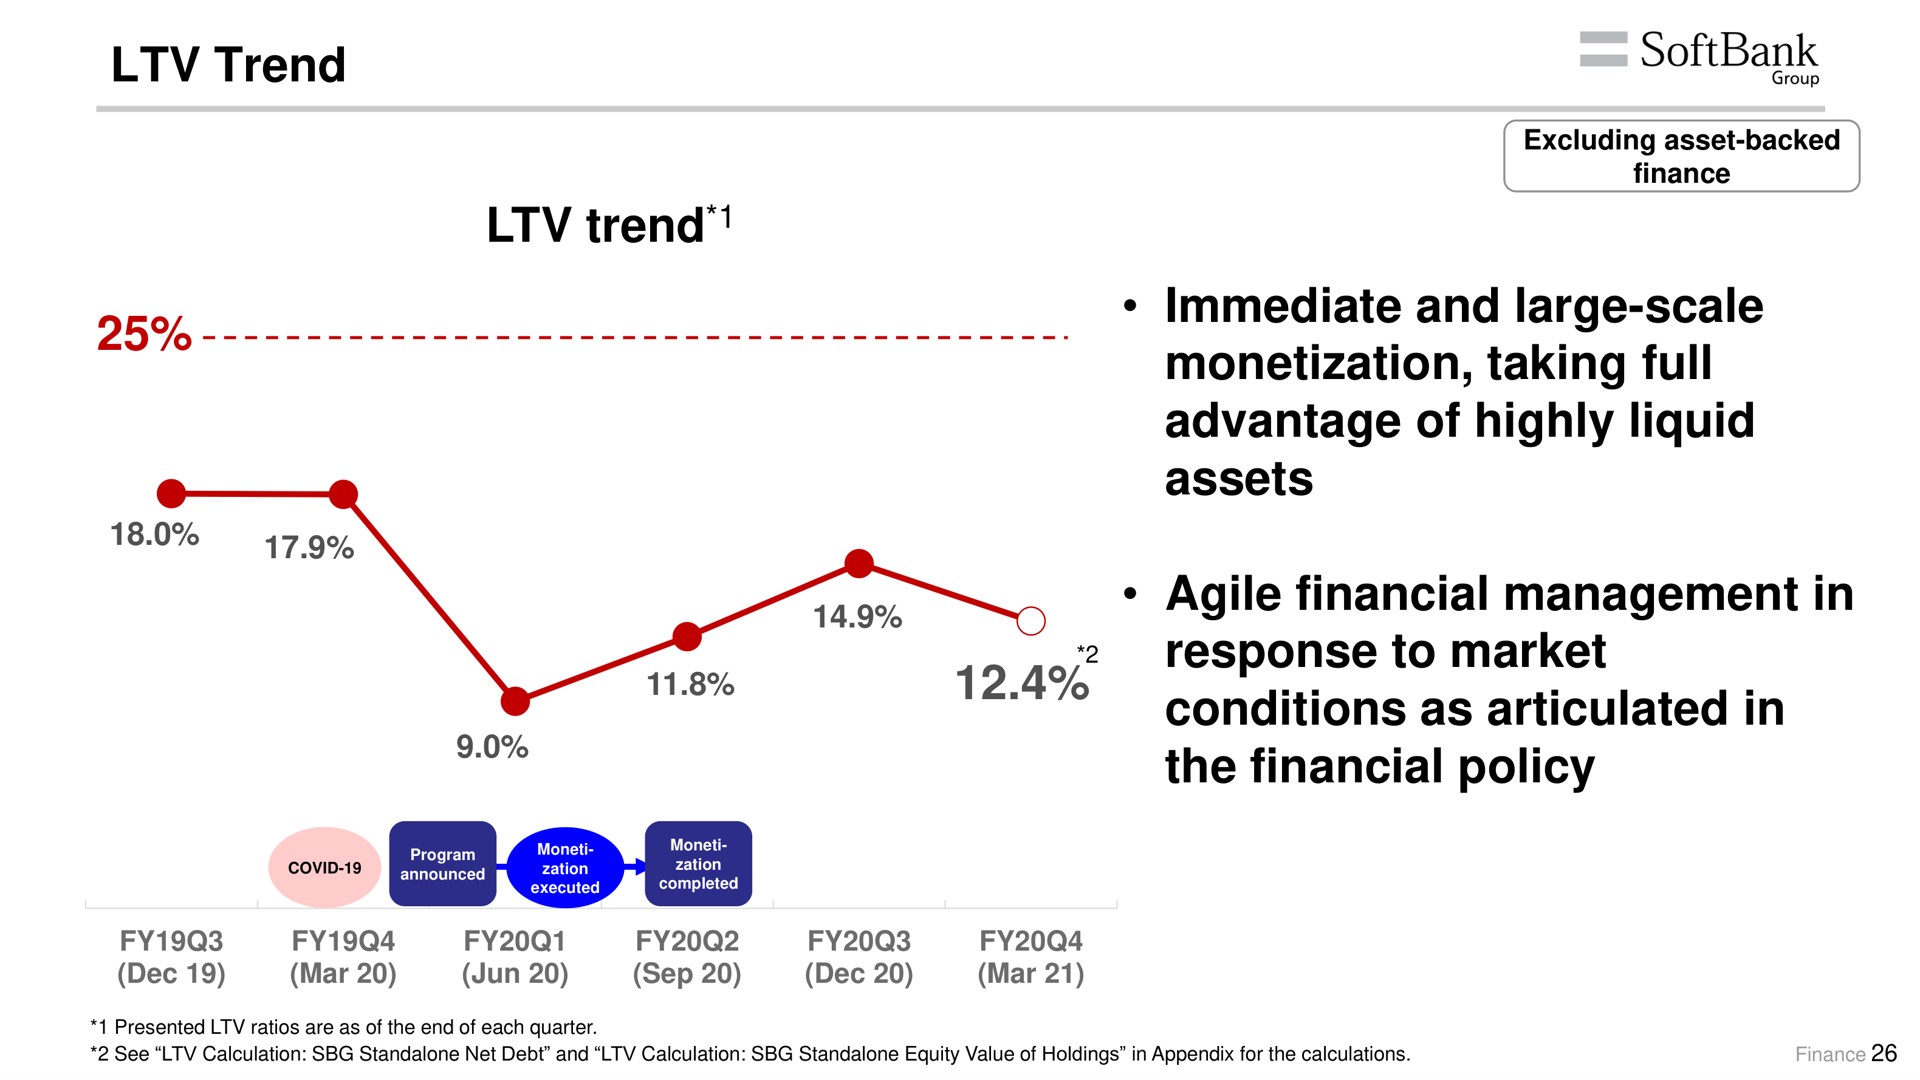 trend trend immediate and large scale monetization taking full advantage of highly liquid assets agile financial management in response to market conditions as articulated in the financial policy | SoftBank